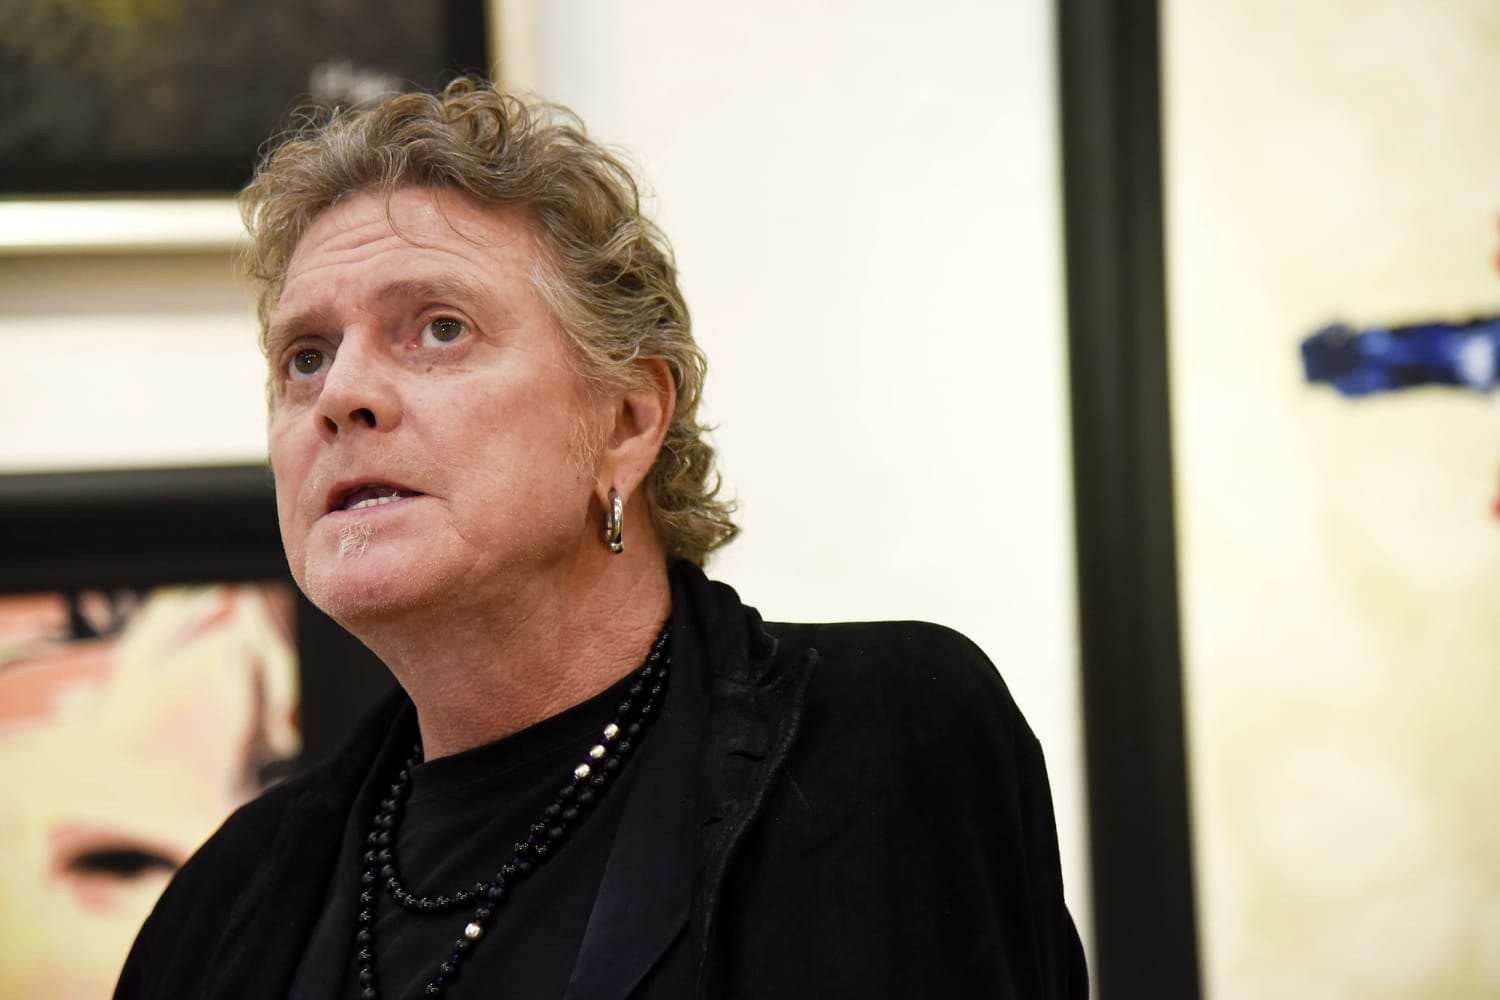 Def Leppard drummer says he's recovering after he was attacked during a smoke break in Florida